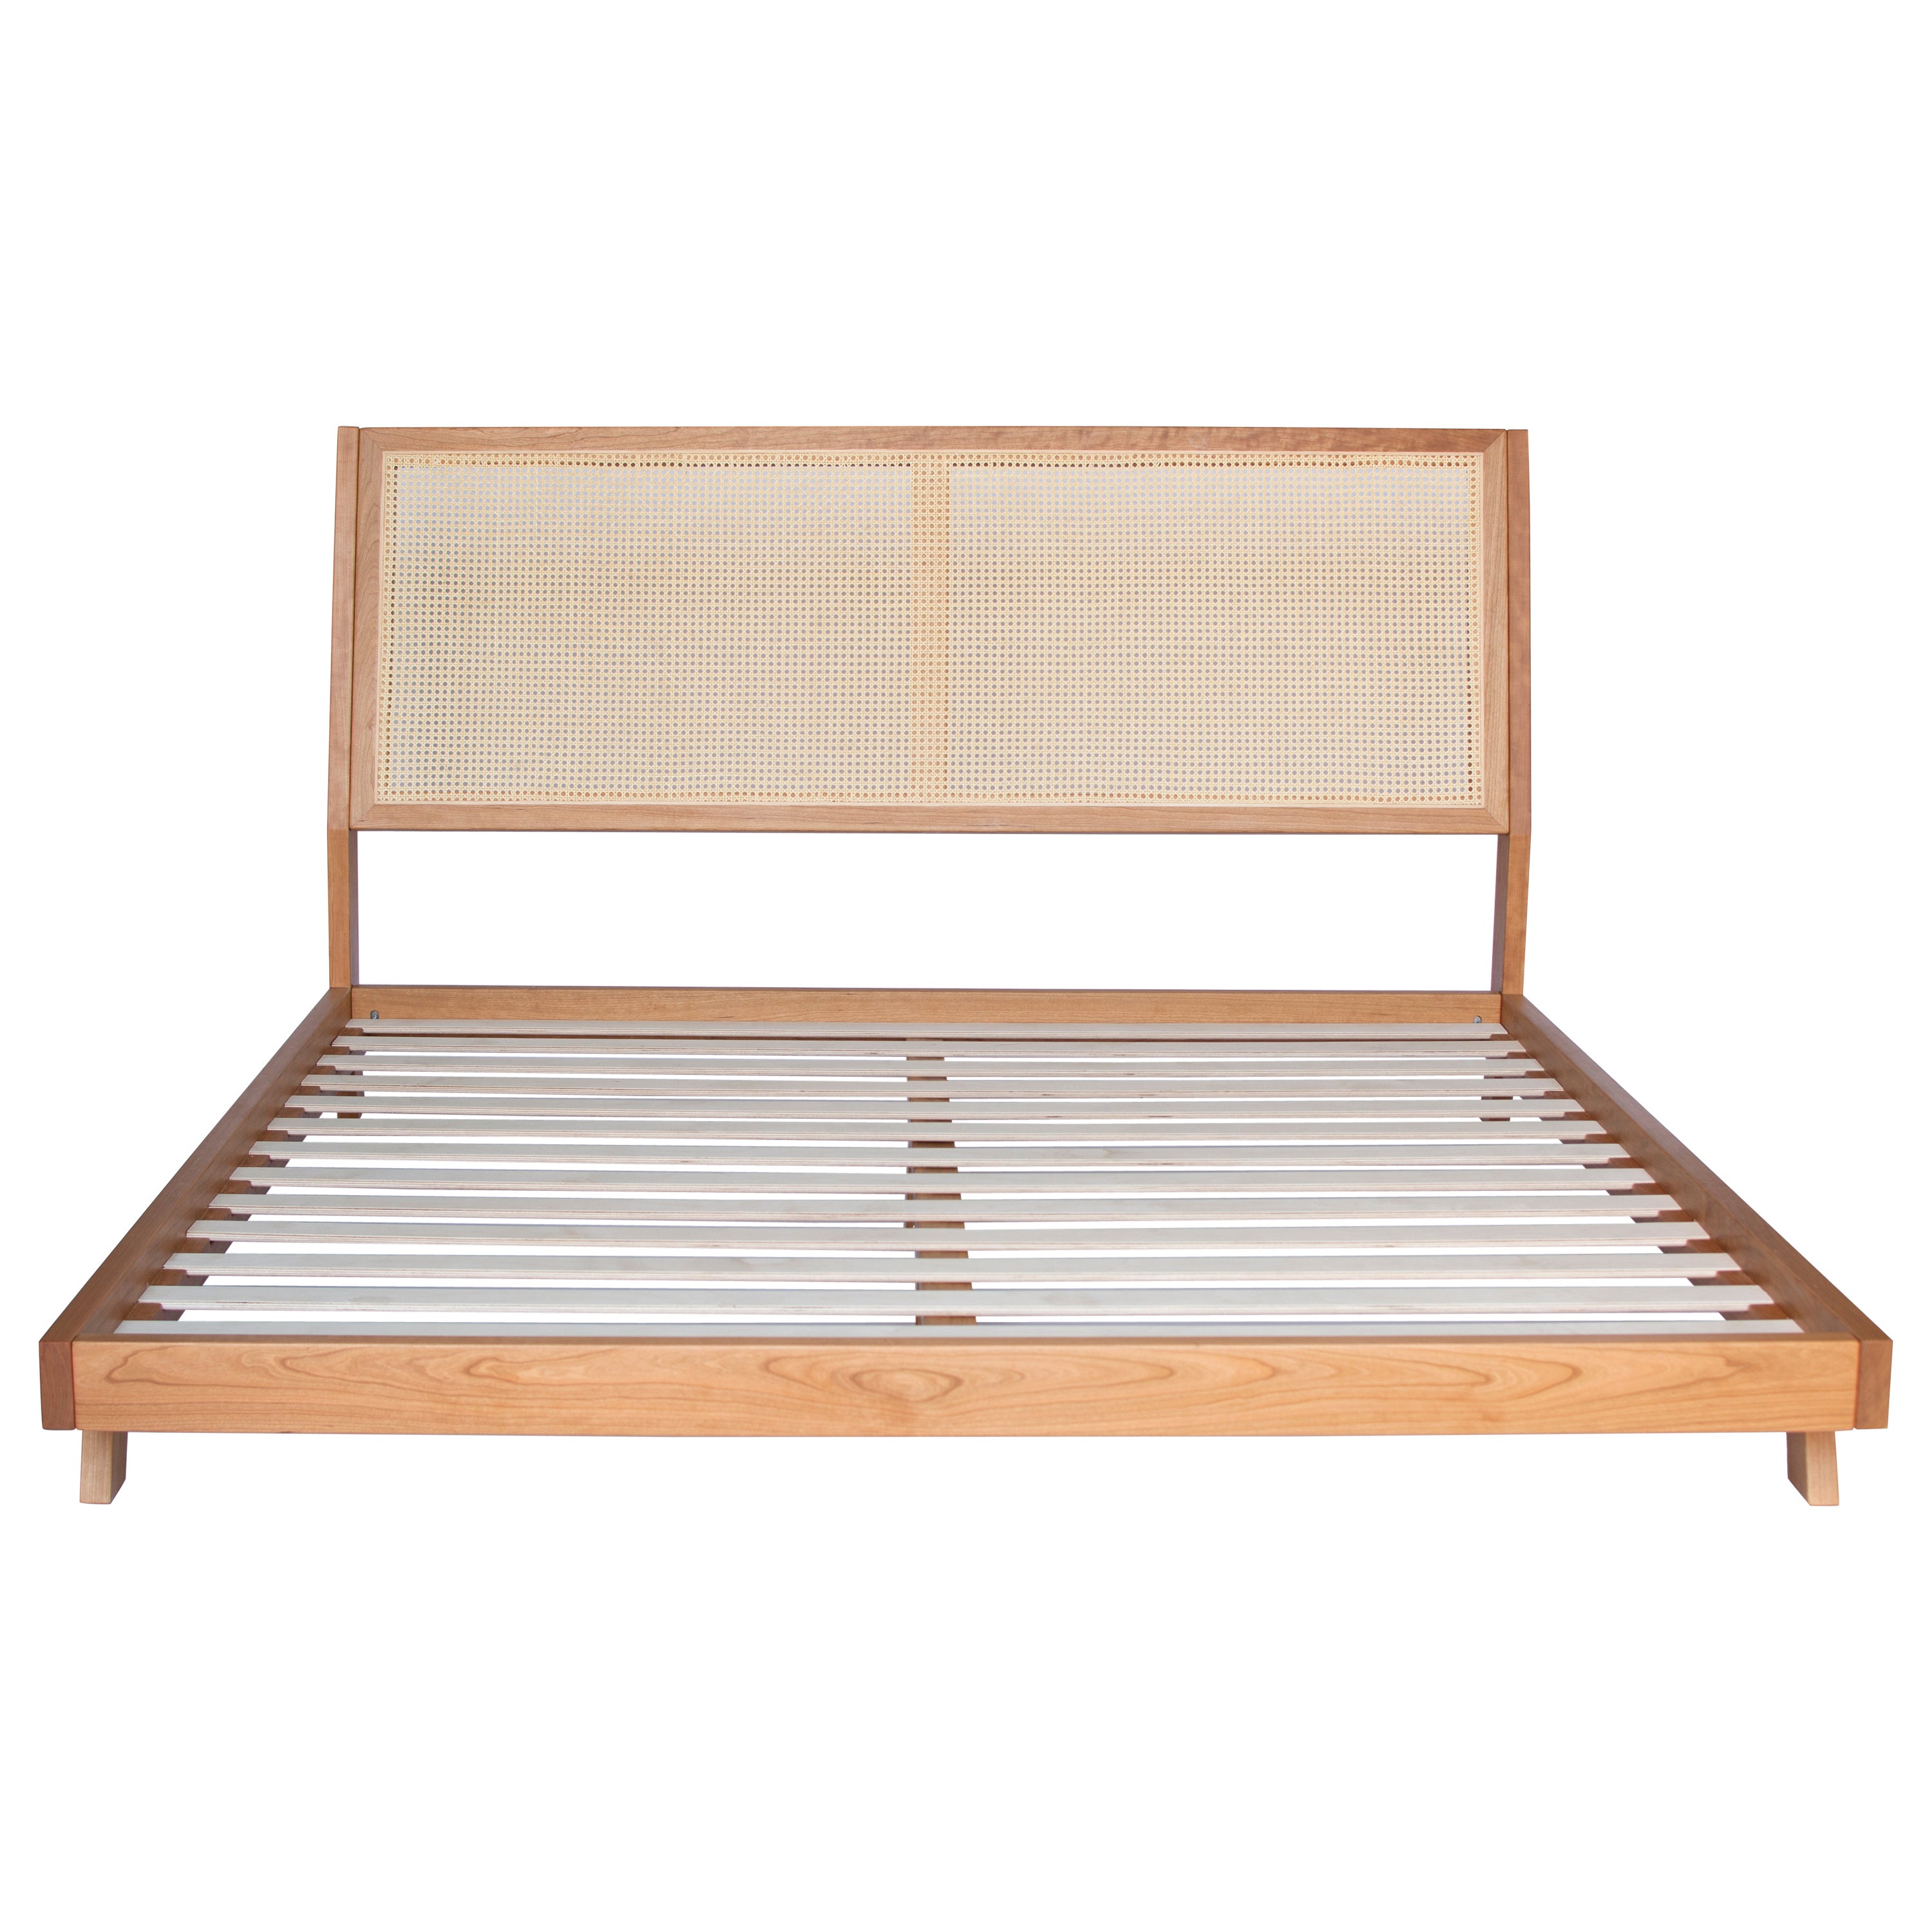 Brotherton Bed Frame in Solid Cherry with Cane Headboard